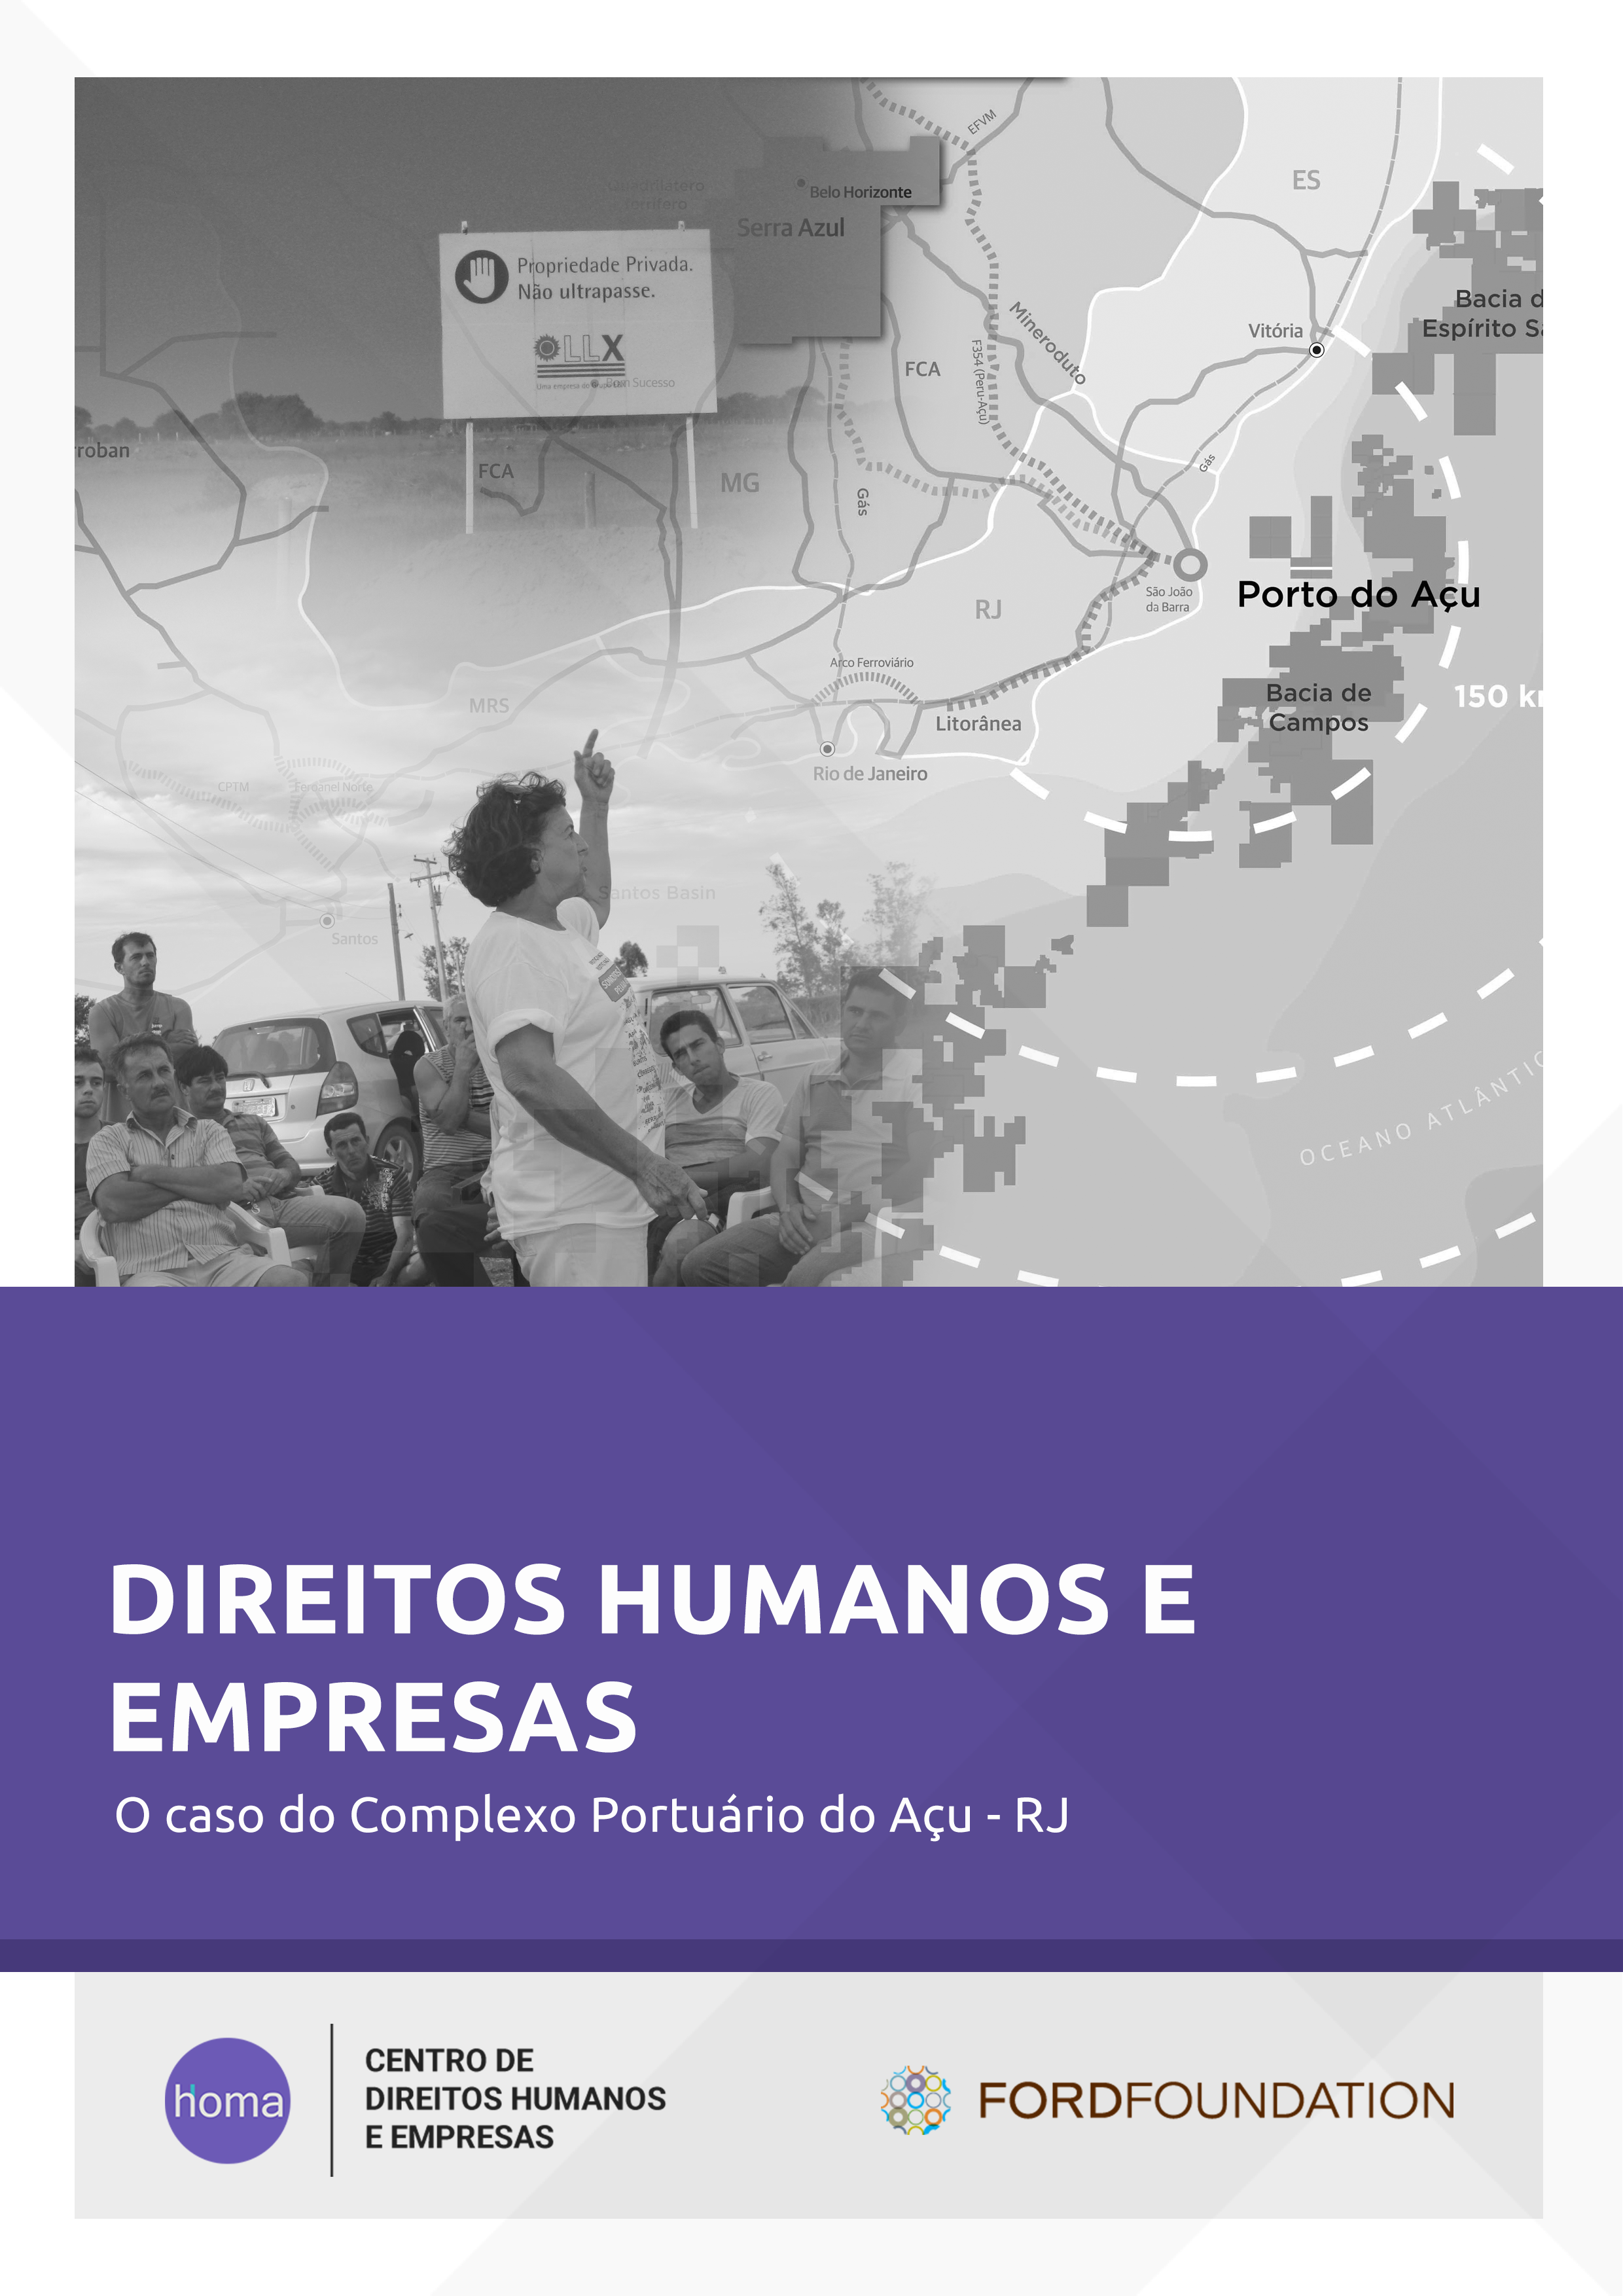 Human Rights and Business: the case of the Açu Port Complex - RJ